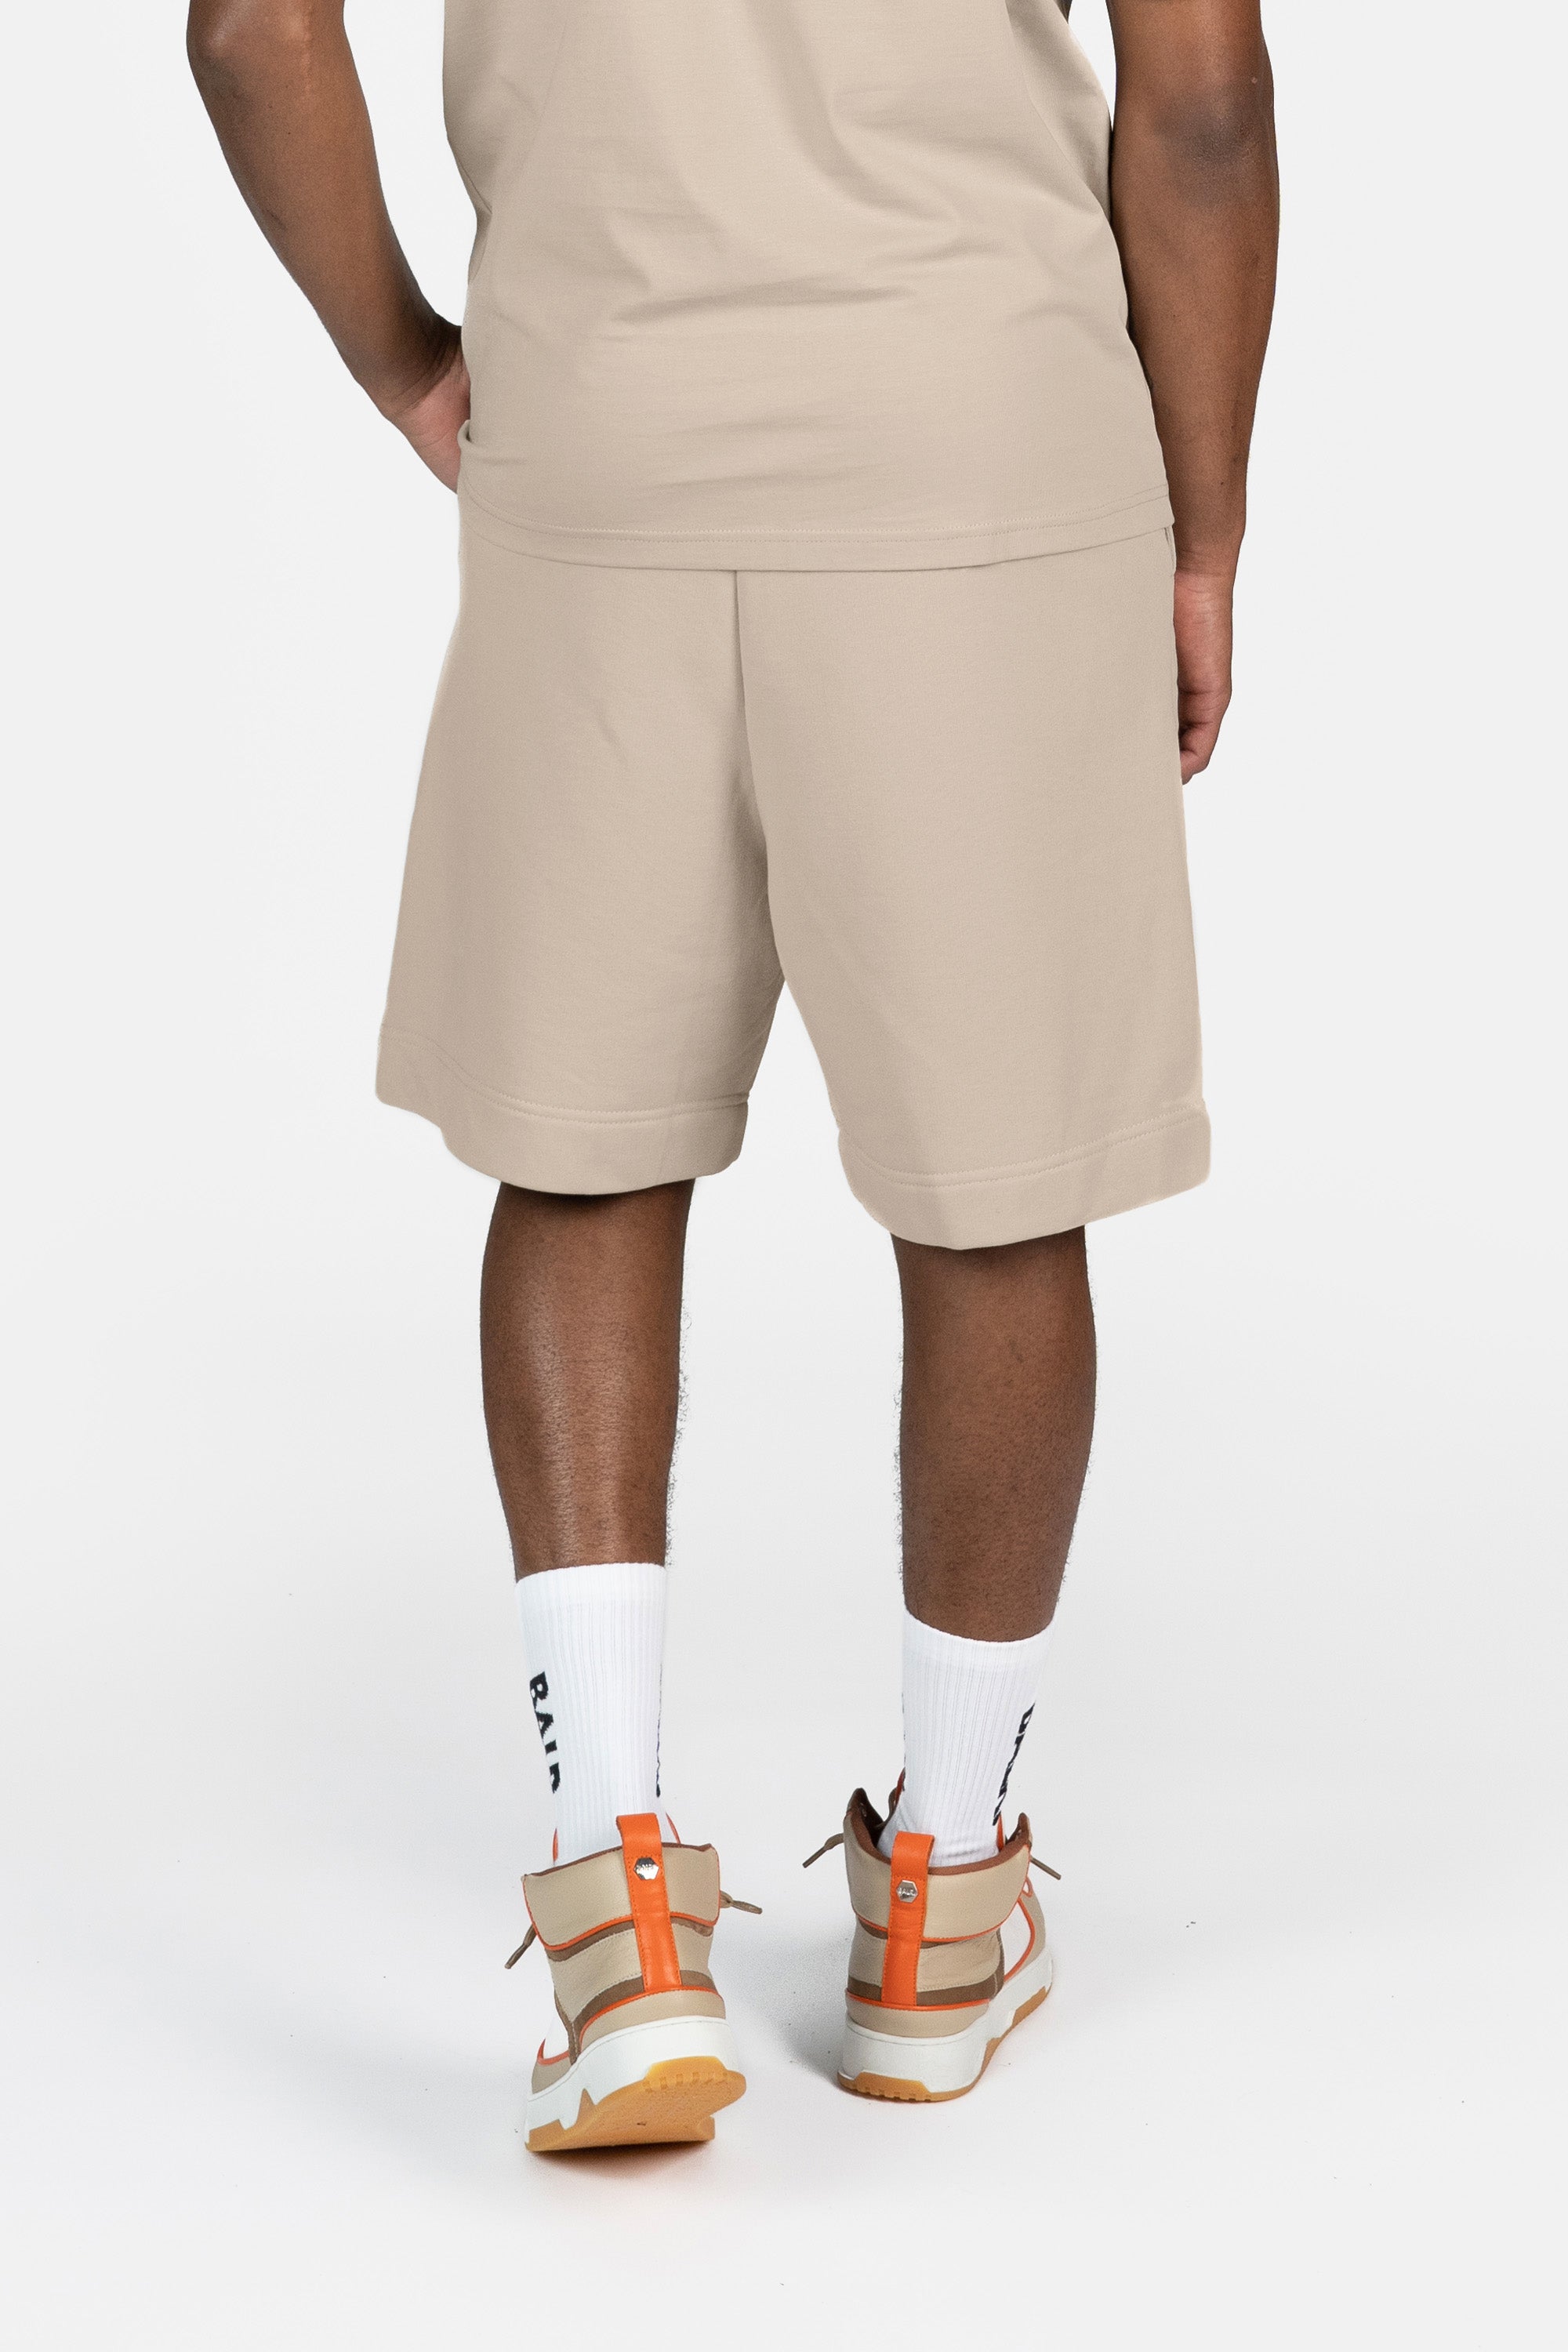 The Wall Box Fit Shorts Silver Lining